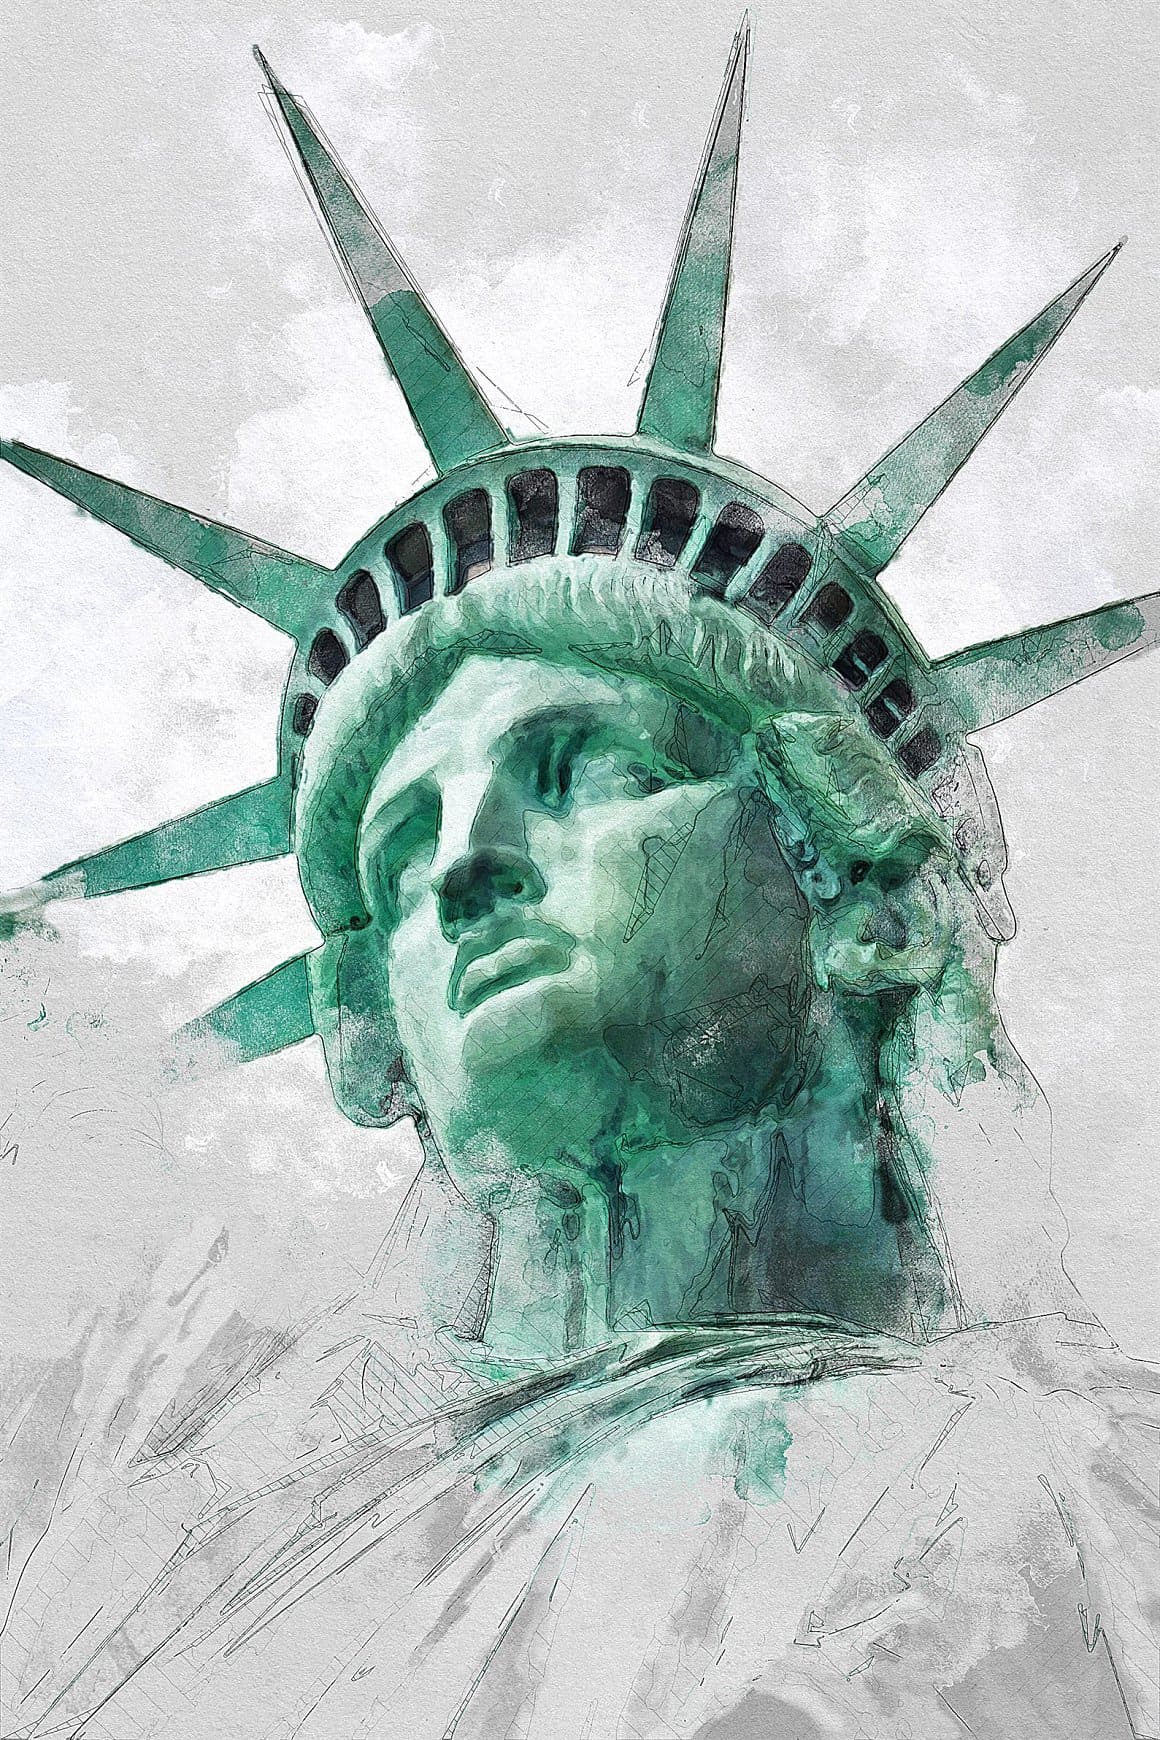 The image of the Statue of Liberty is made with watercolors in Photoshop.